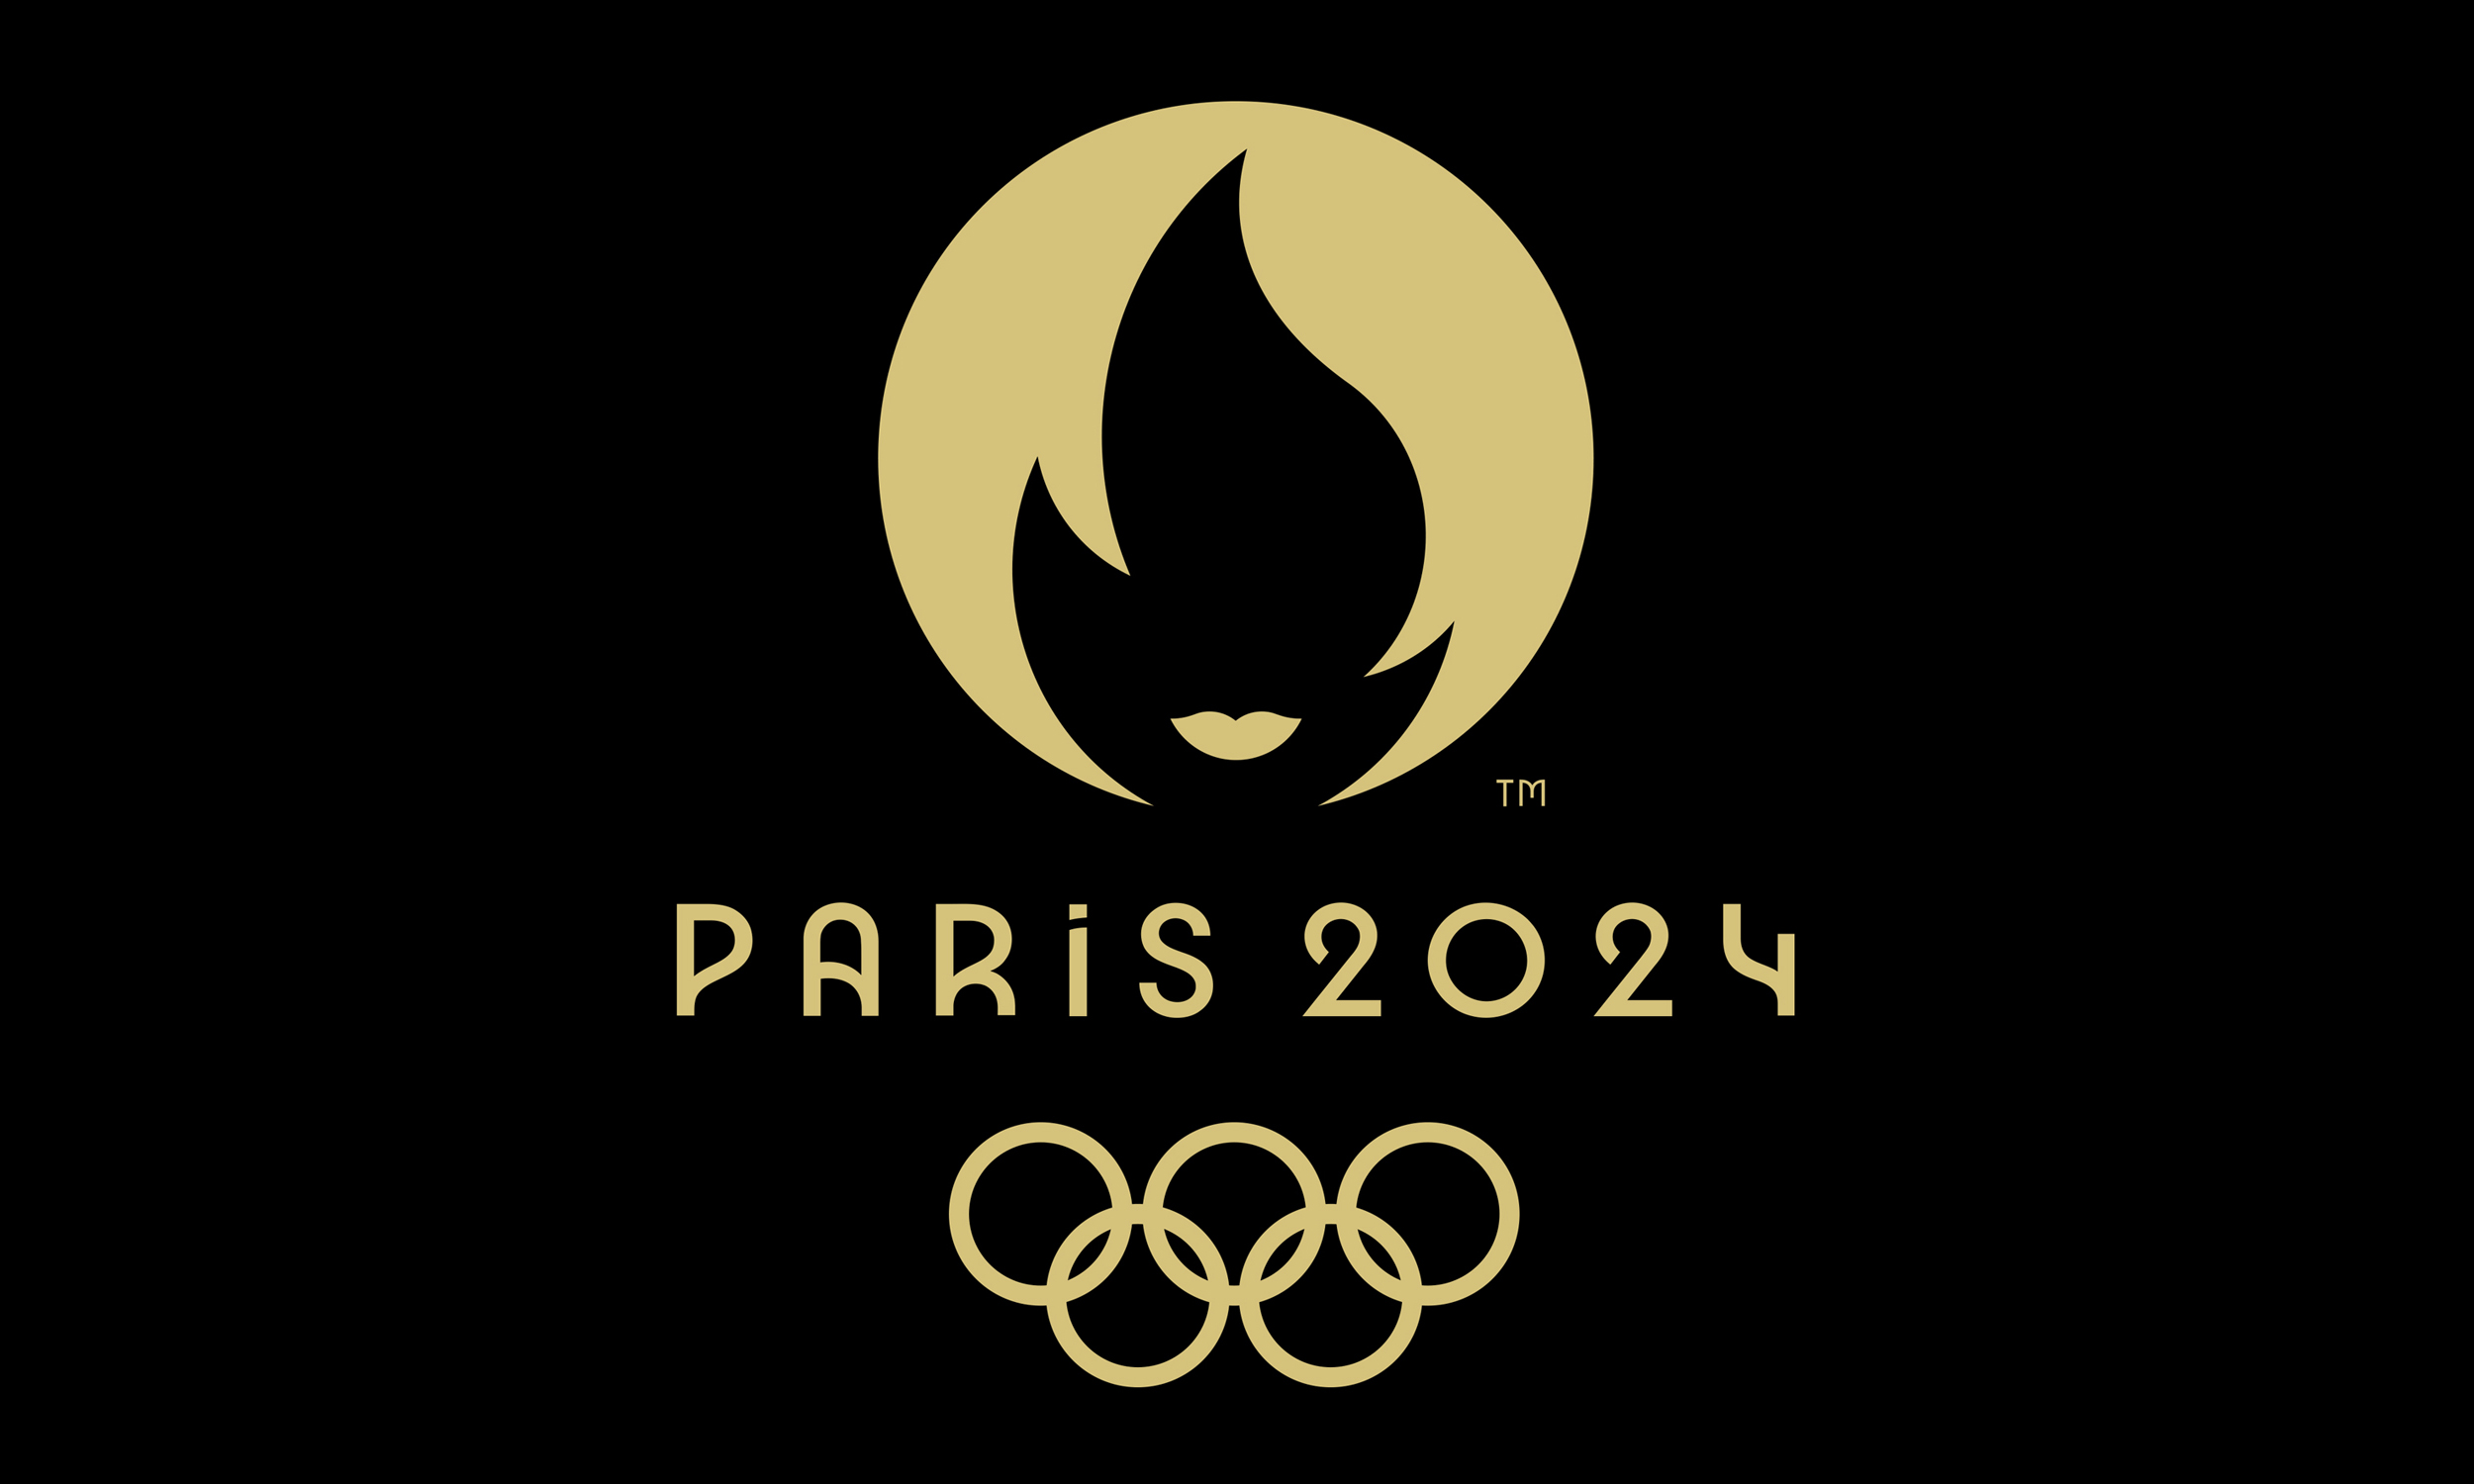 Branding for the 2024 Olympic Games in Paris takes our breath away